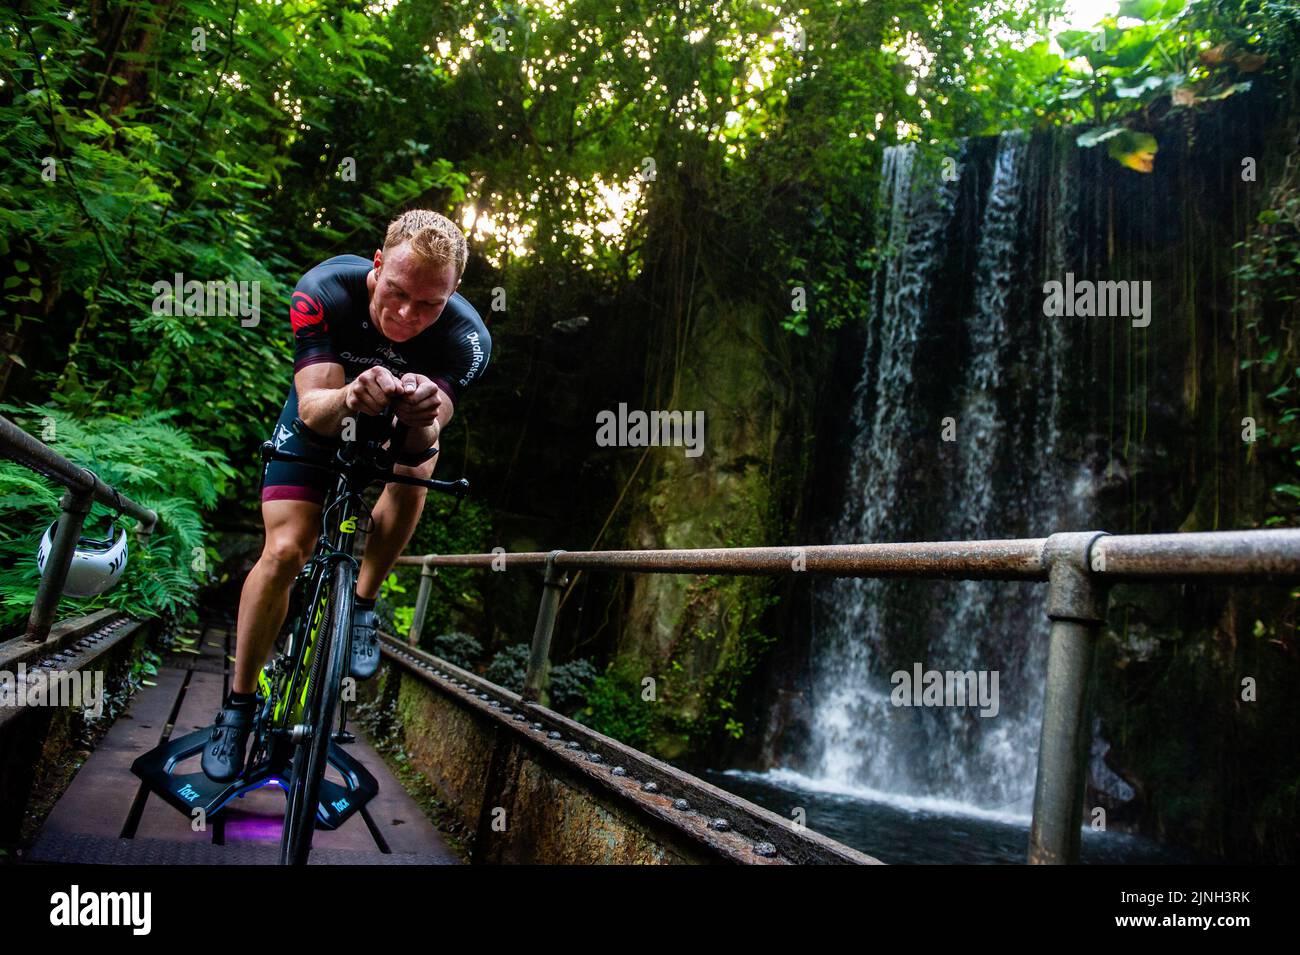 A view of the waterfall with athlete Olaf Van Den Bergh training on his bike. Dutch top athlete Olaf Van Den Bergh starts training in the indoor tropical rainforest of the Burgers' Zoo in Arnhem, in preparation for the Ironman World Championships in Kailua-Kona located in Hawaii. The Bush (indoor tropical rainforest) is the ideal training location because of the high humidity and temperature. (Photo by Ana Fernandez / SOPA Images/Sipa USA) Stock Photo